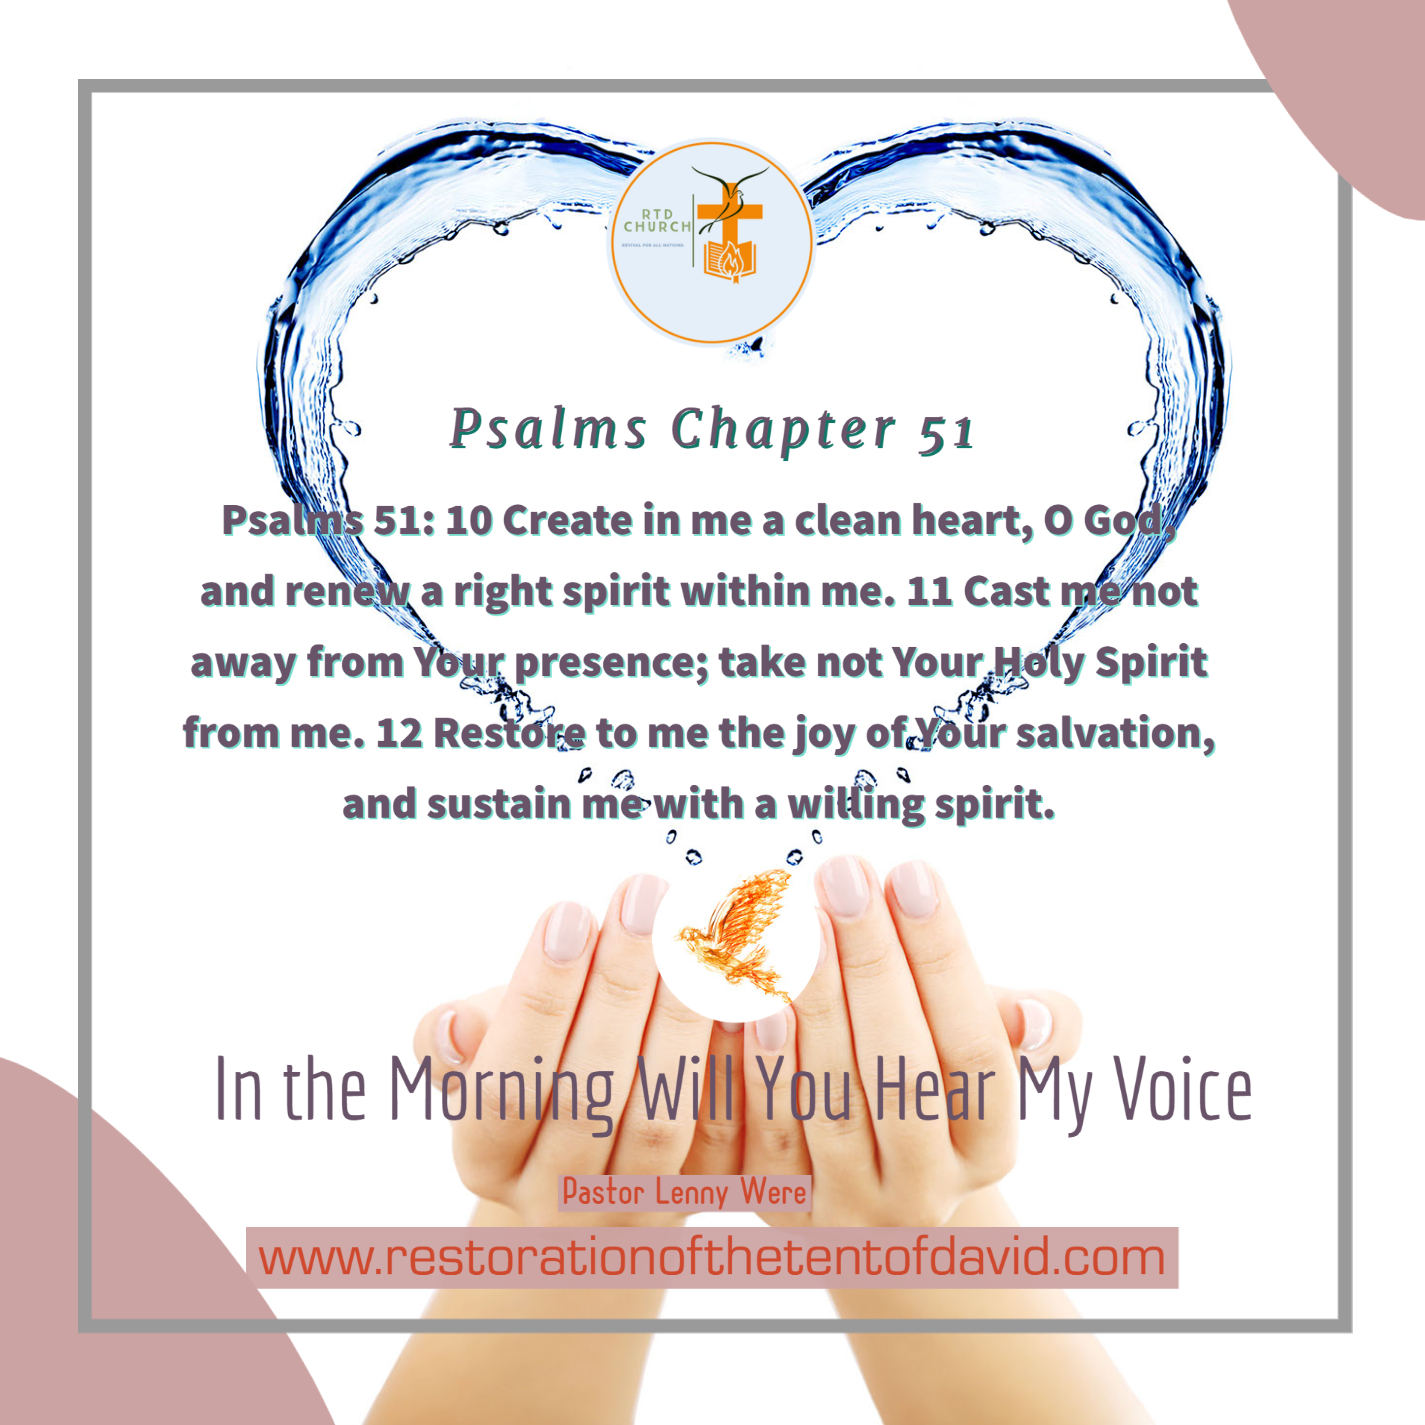 In the Morning will you hear my Voice, Psalms Chapter 51